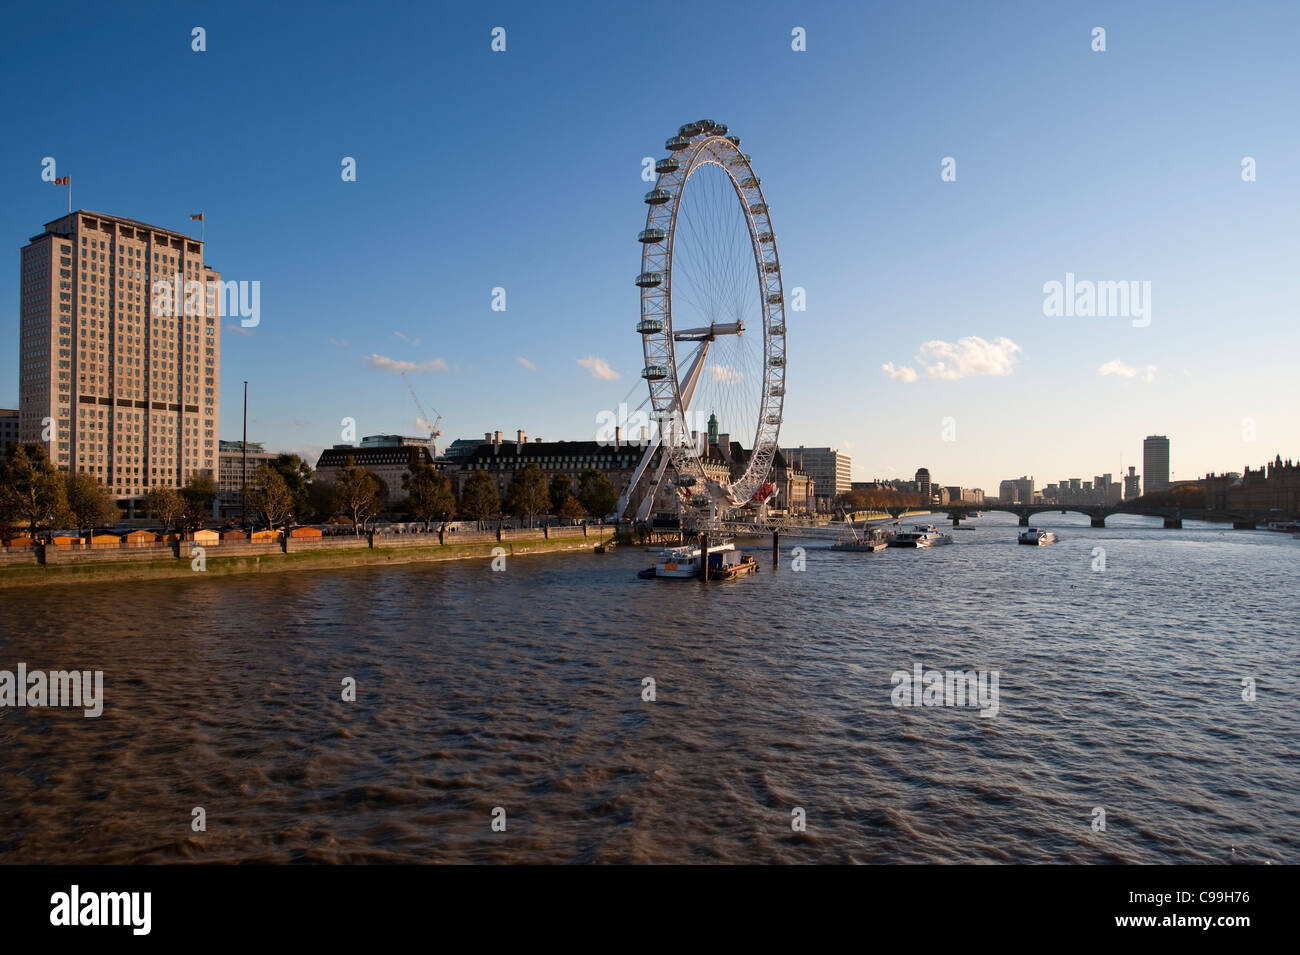 The iconic London Eye and Shell Centre building on the south bank of the river Thames in Autumn evening sunlight. Stock Photo